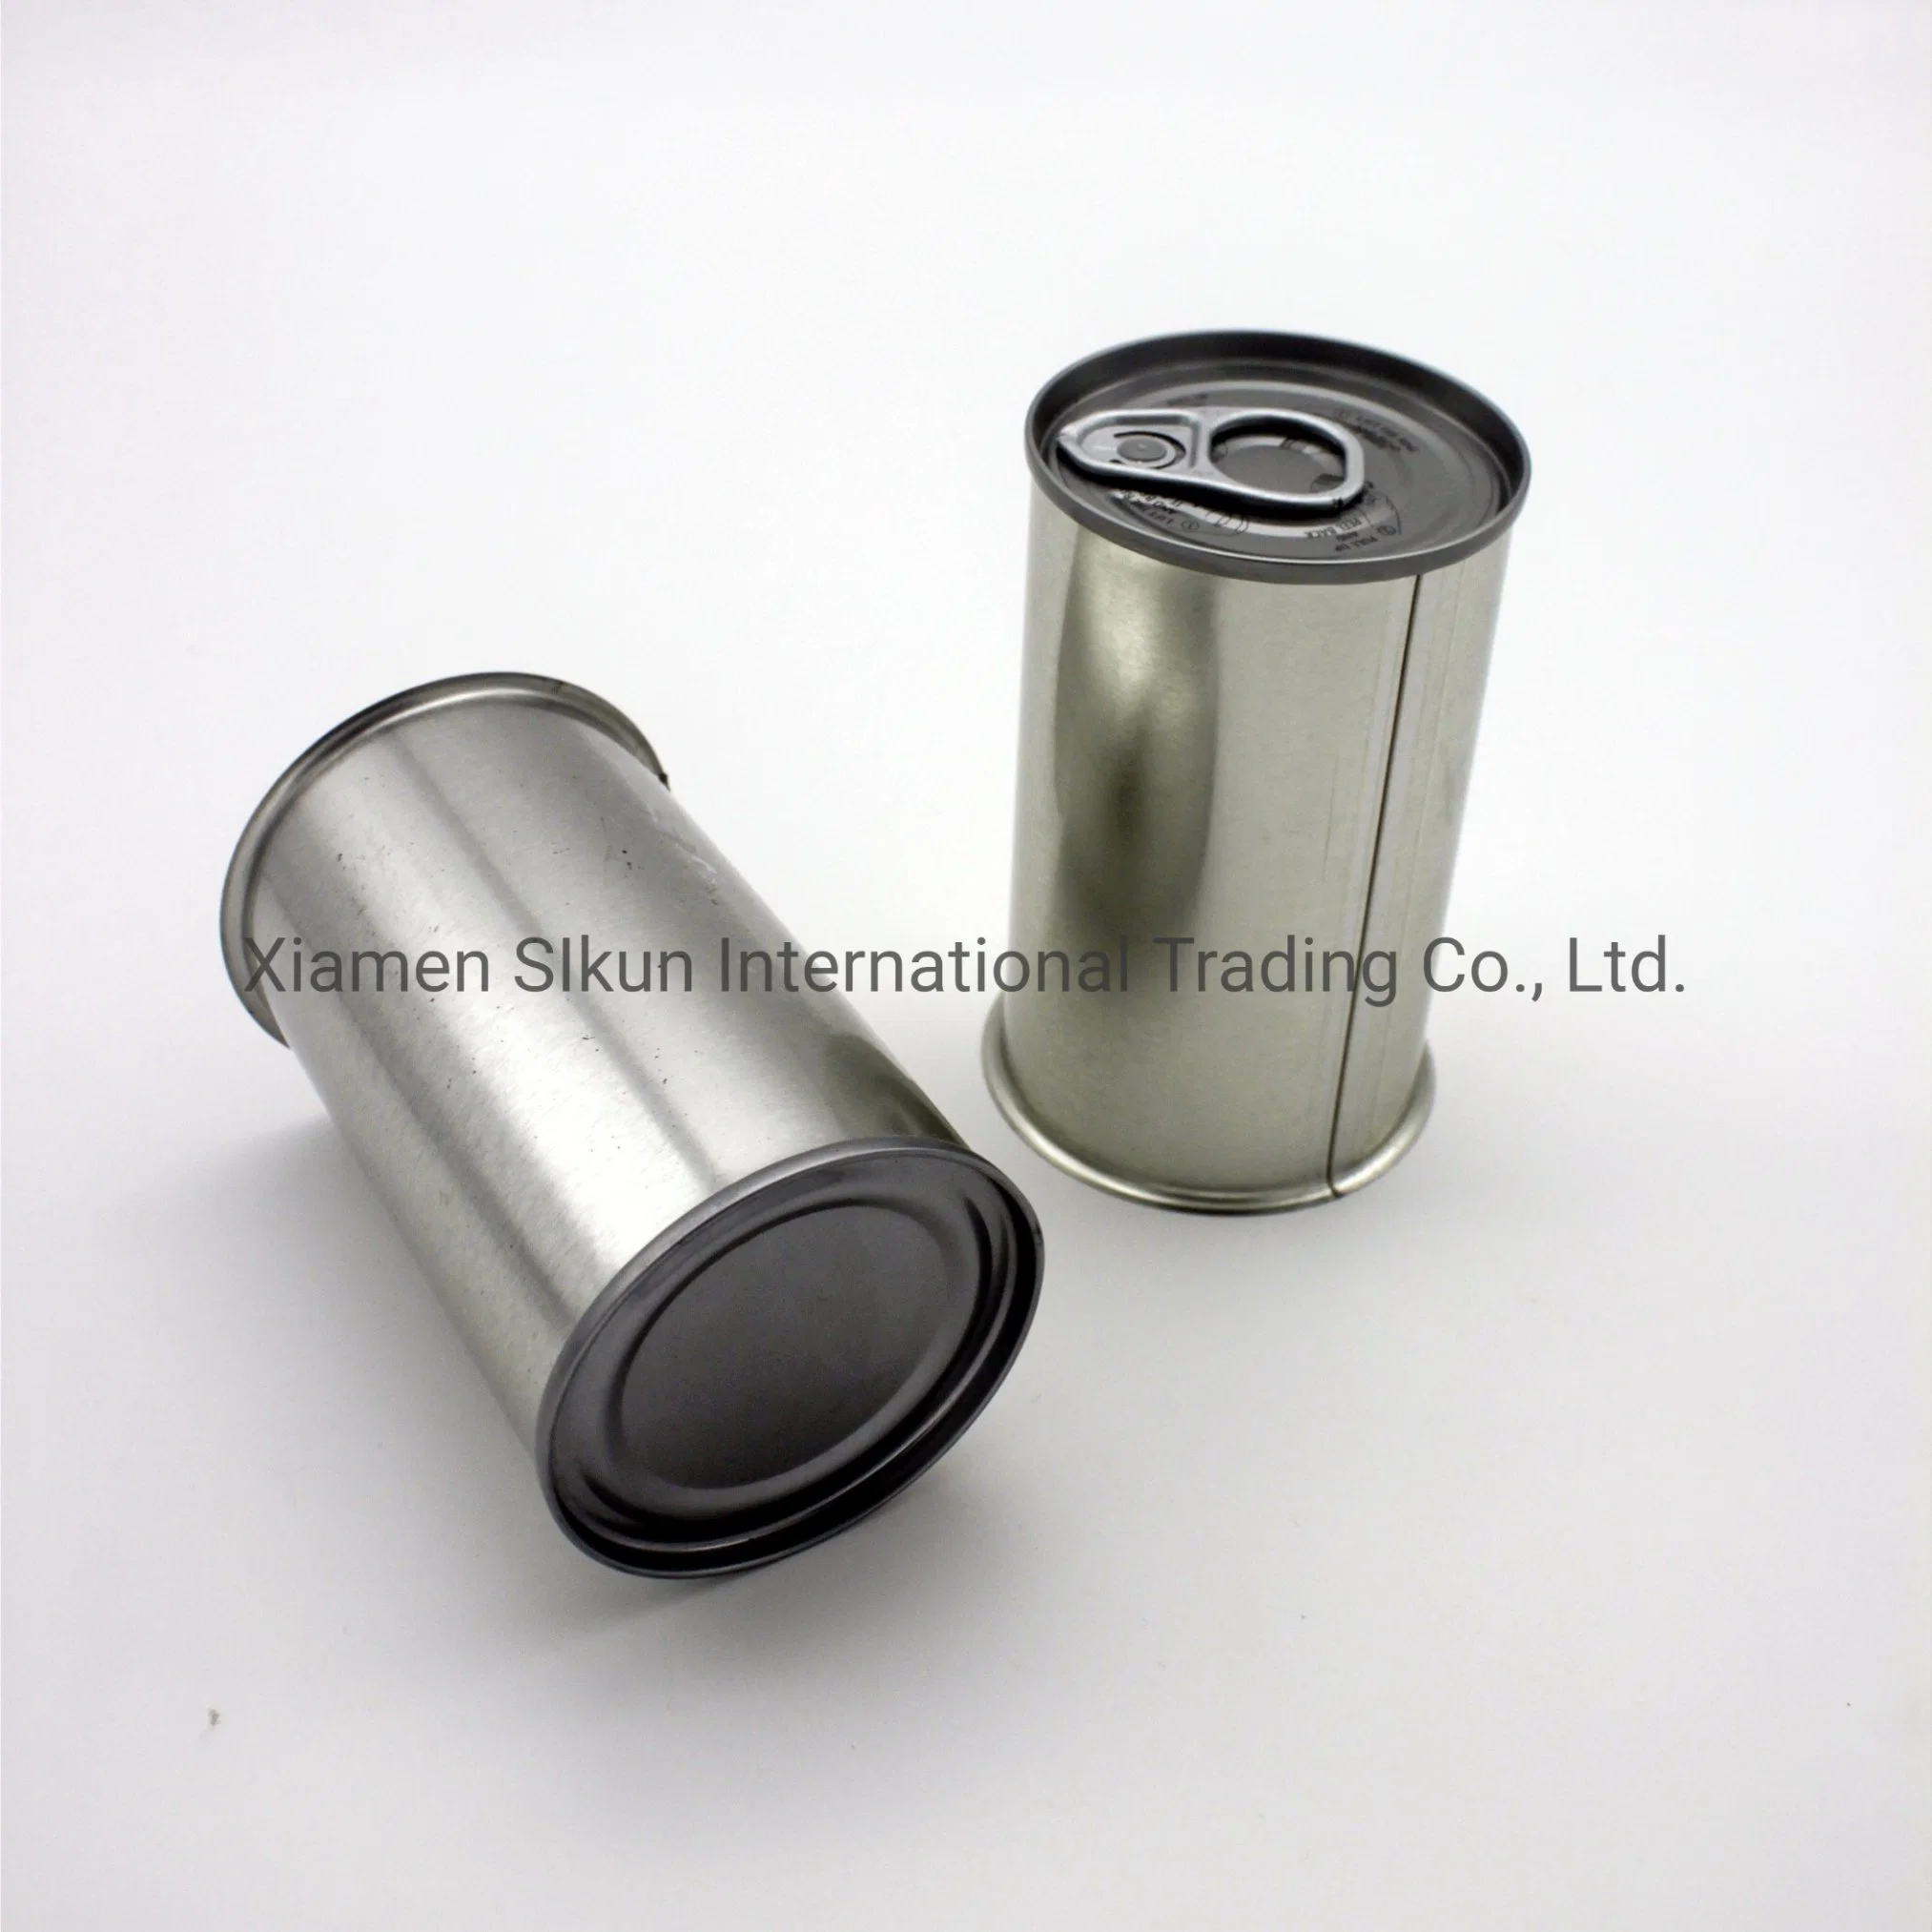 New 588# Tin Cans Products for Packing Low Price Hot Wholesale/Supplier Quality Quality Assurance